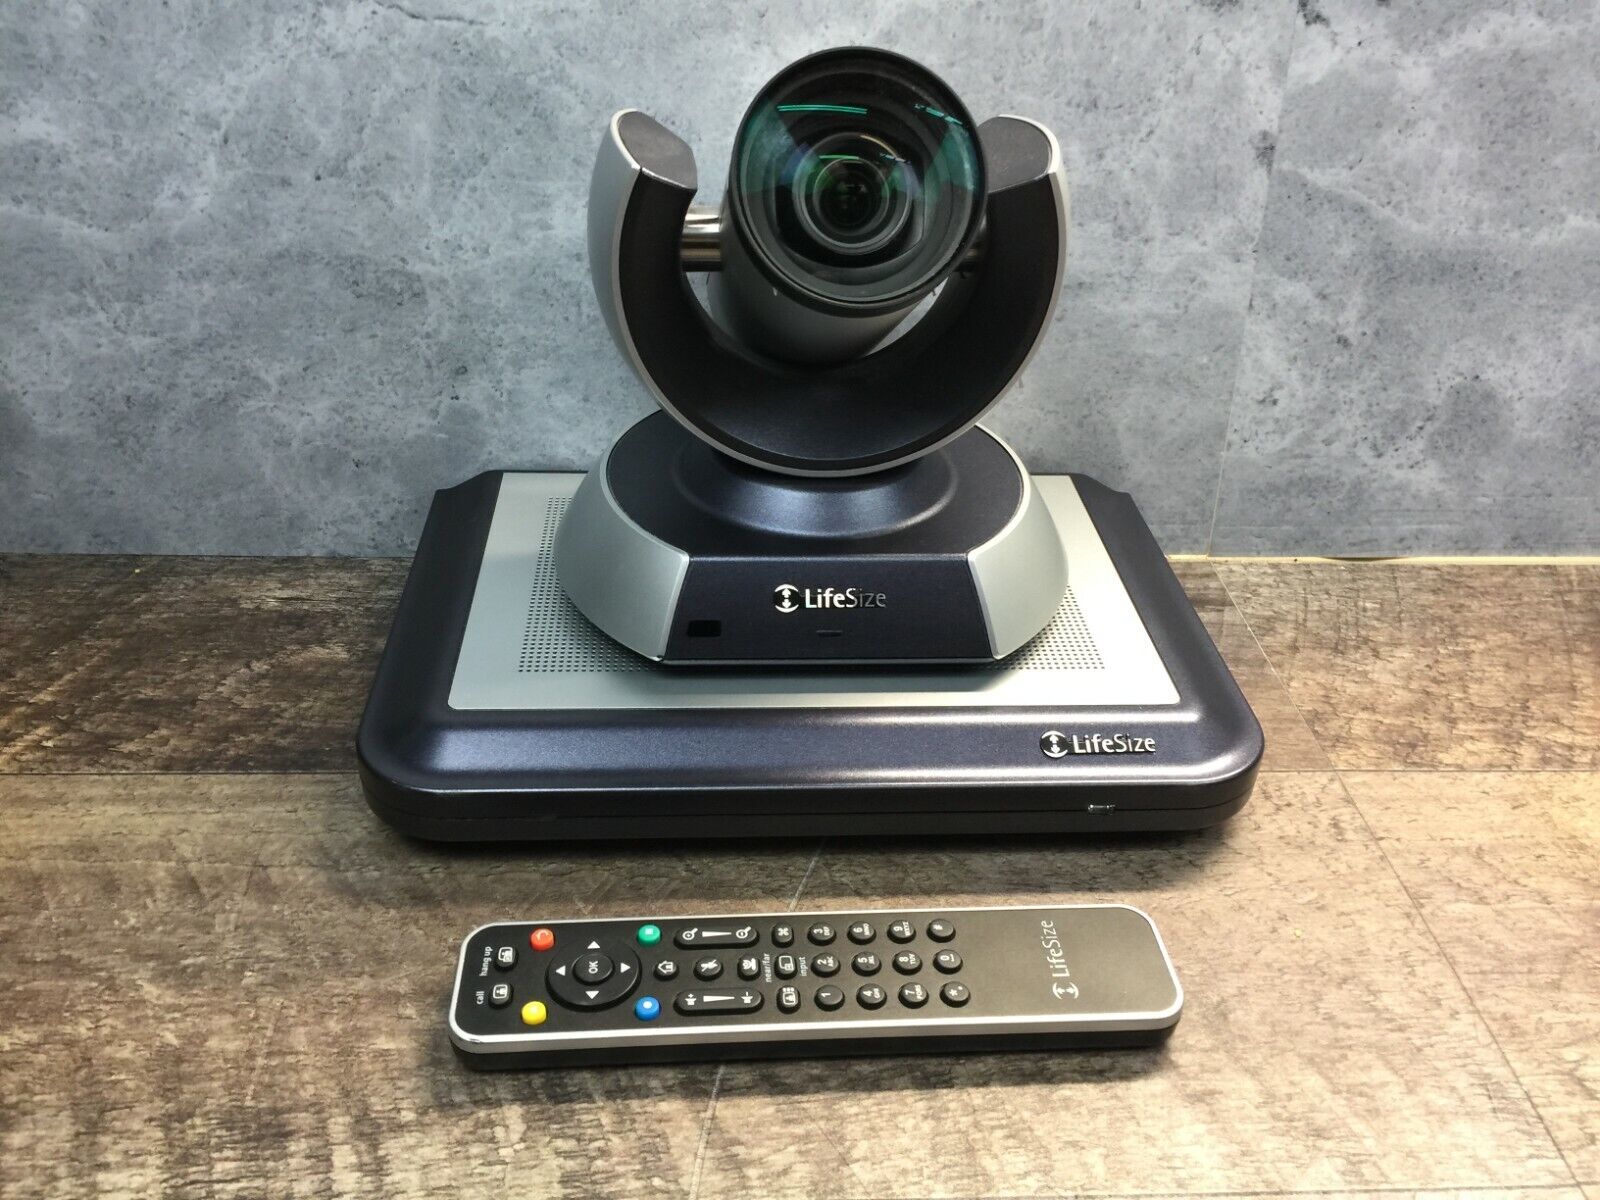 LifeSize 10x LFZ-019 W/LFZ-018 Video Conferencing System Motorized PWR On *Parts